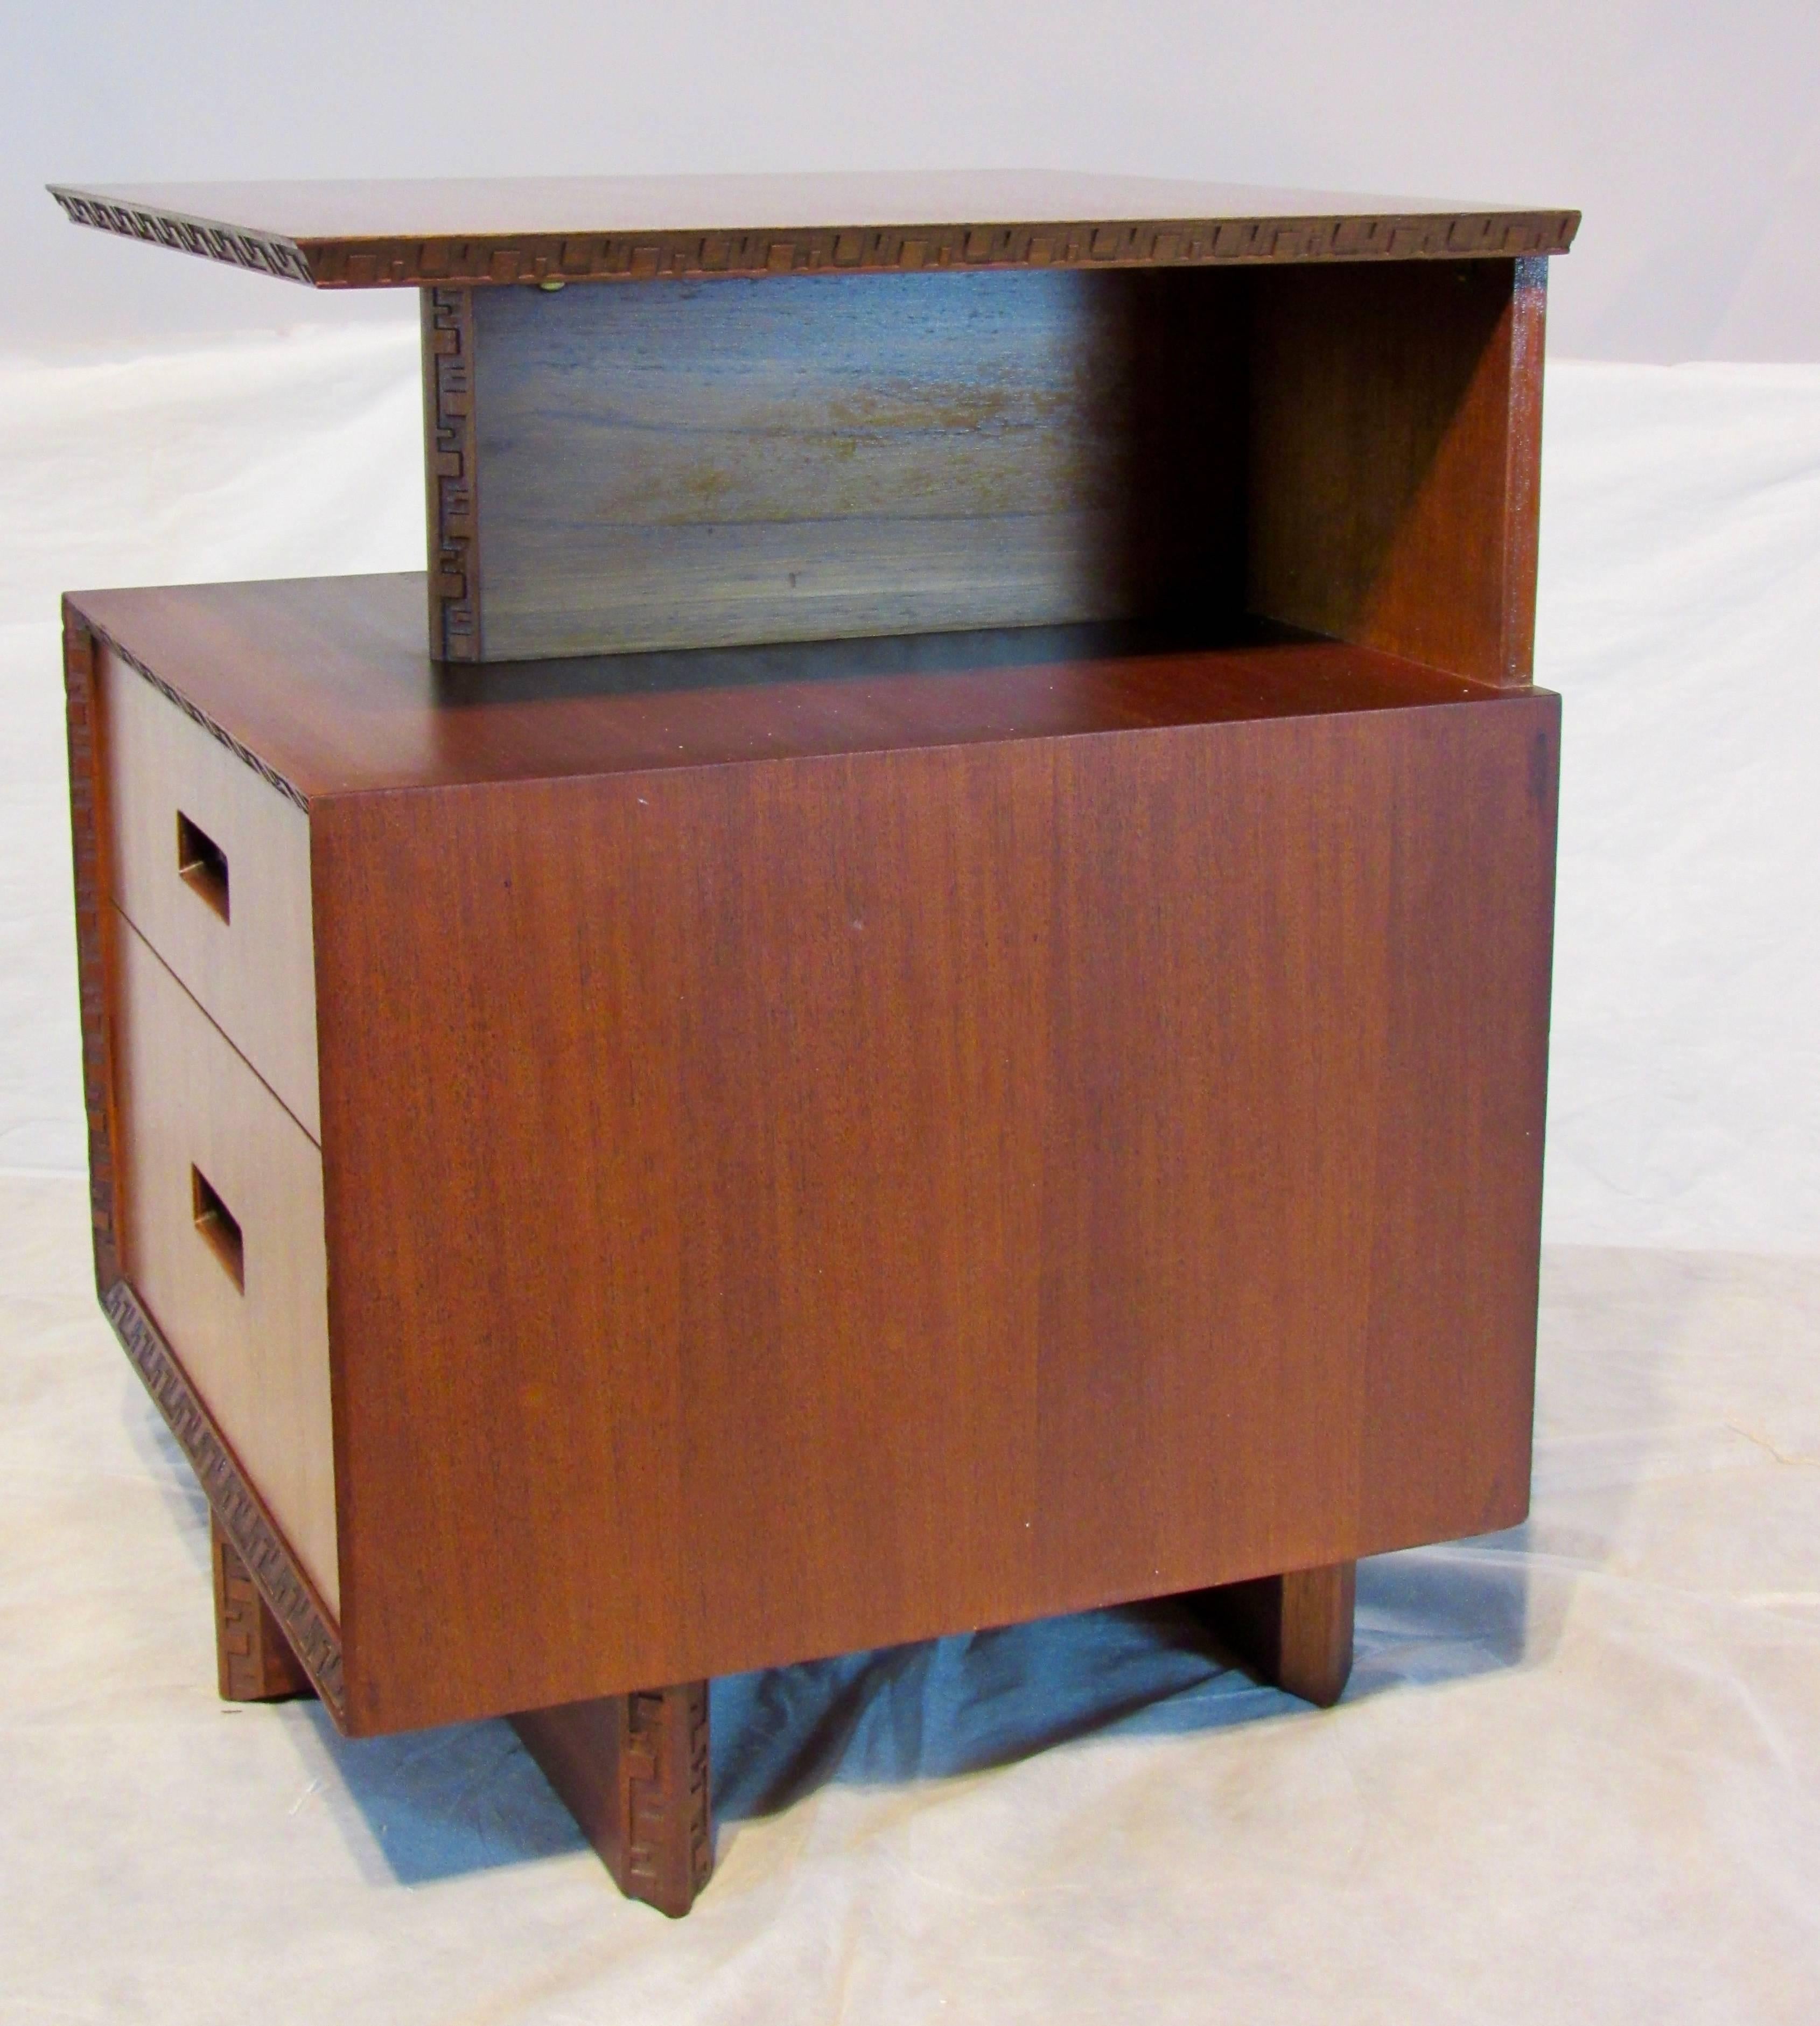 Frank Lloyd Wright mahogany nightstand or end table designed for his Taliesin line of furniture manufactured by Heritage Henredon in the mid-1950s.
A storage table that is very sculptural.
The table has been carefully conserved and is in excellent